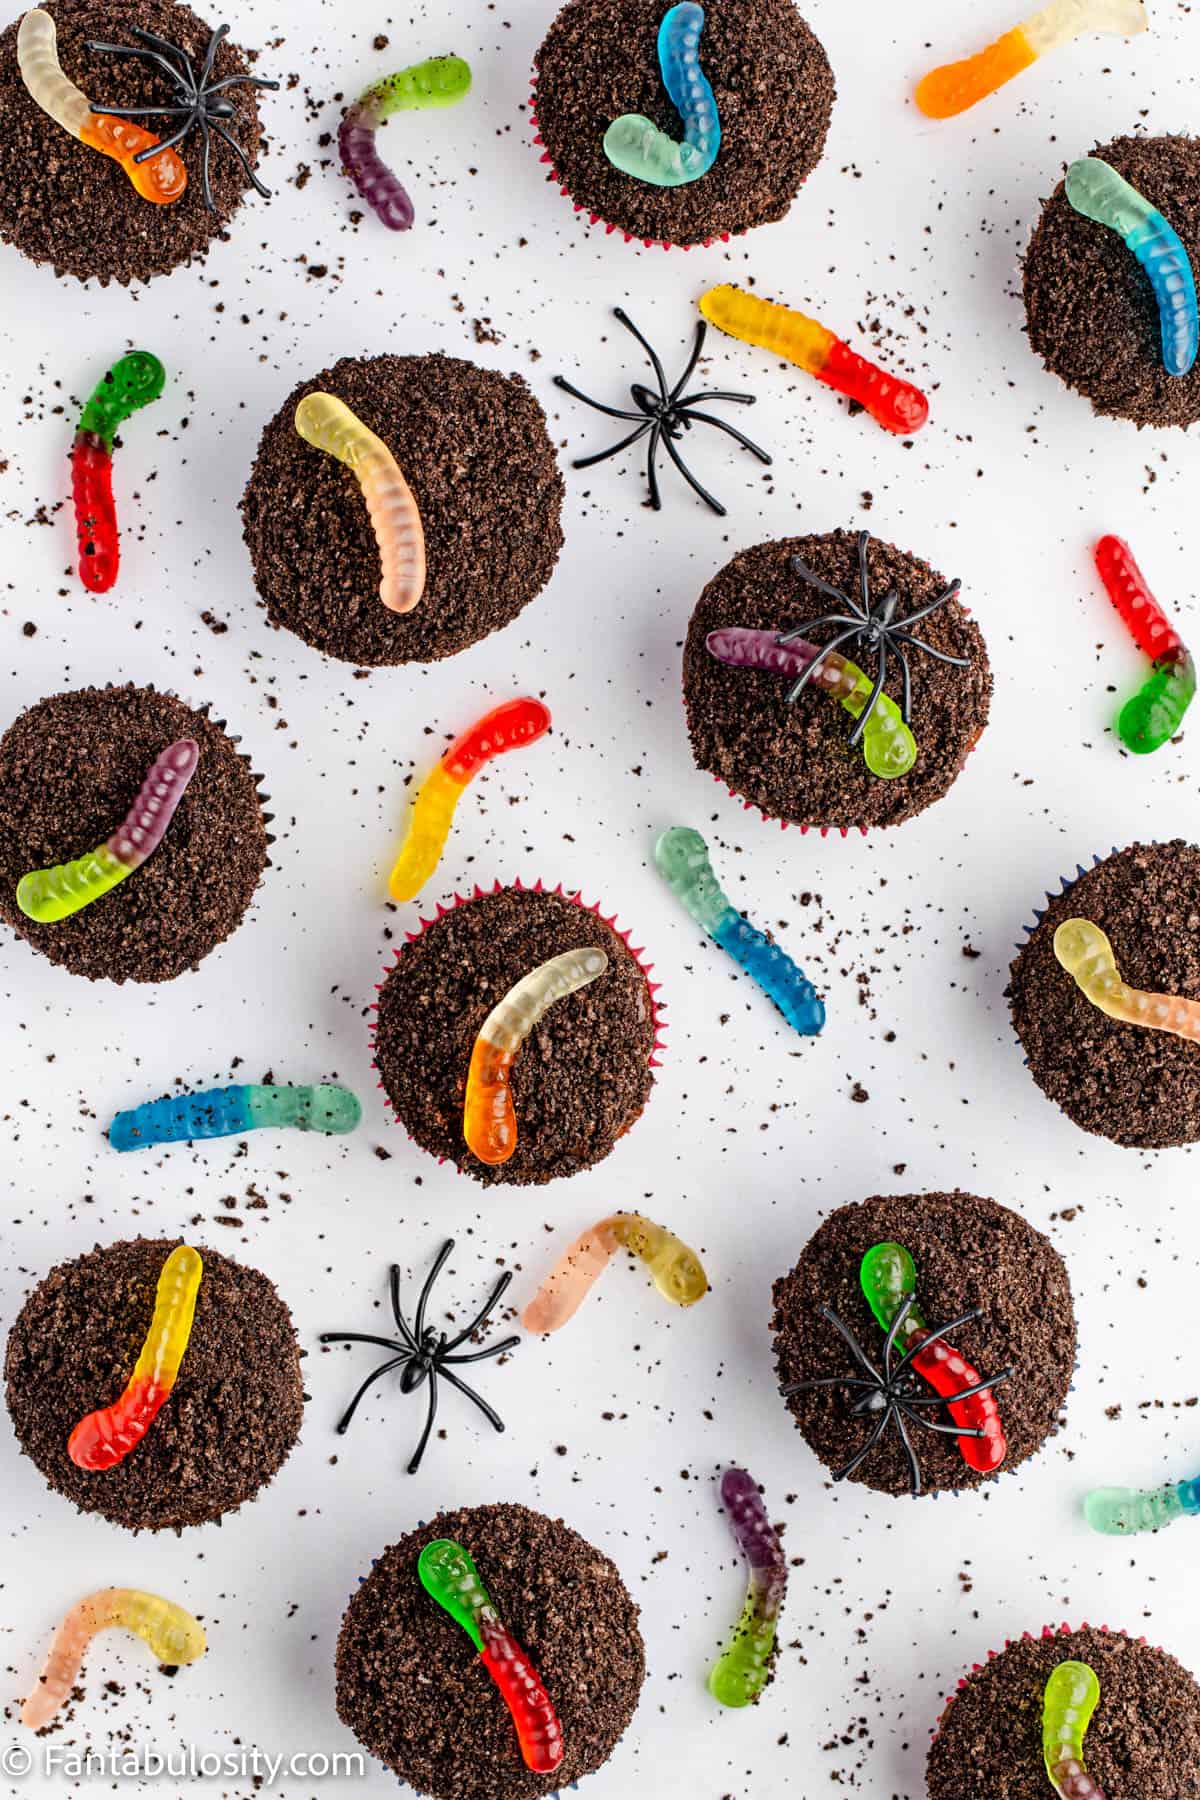 Frosted chocolate cupcakes are topped with Oreo crumbs and gummy worms, surrounded by plastic spiders, gummy worms and Oreo crumbs